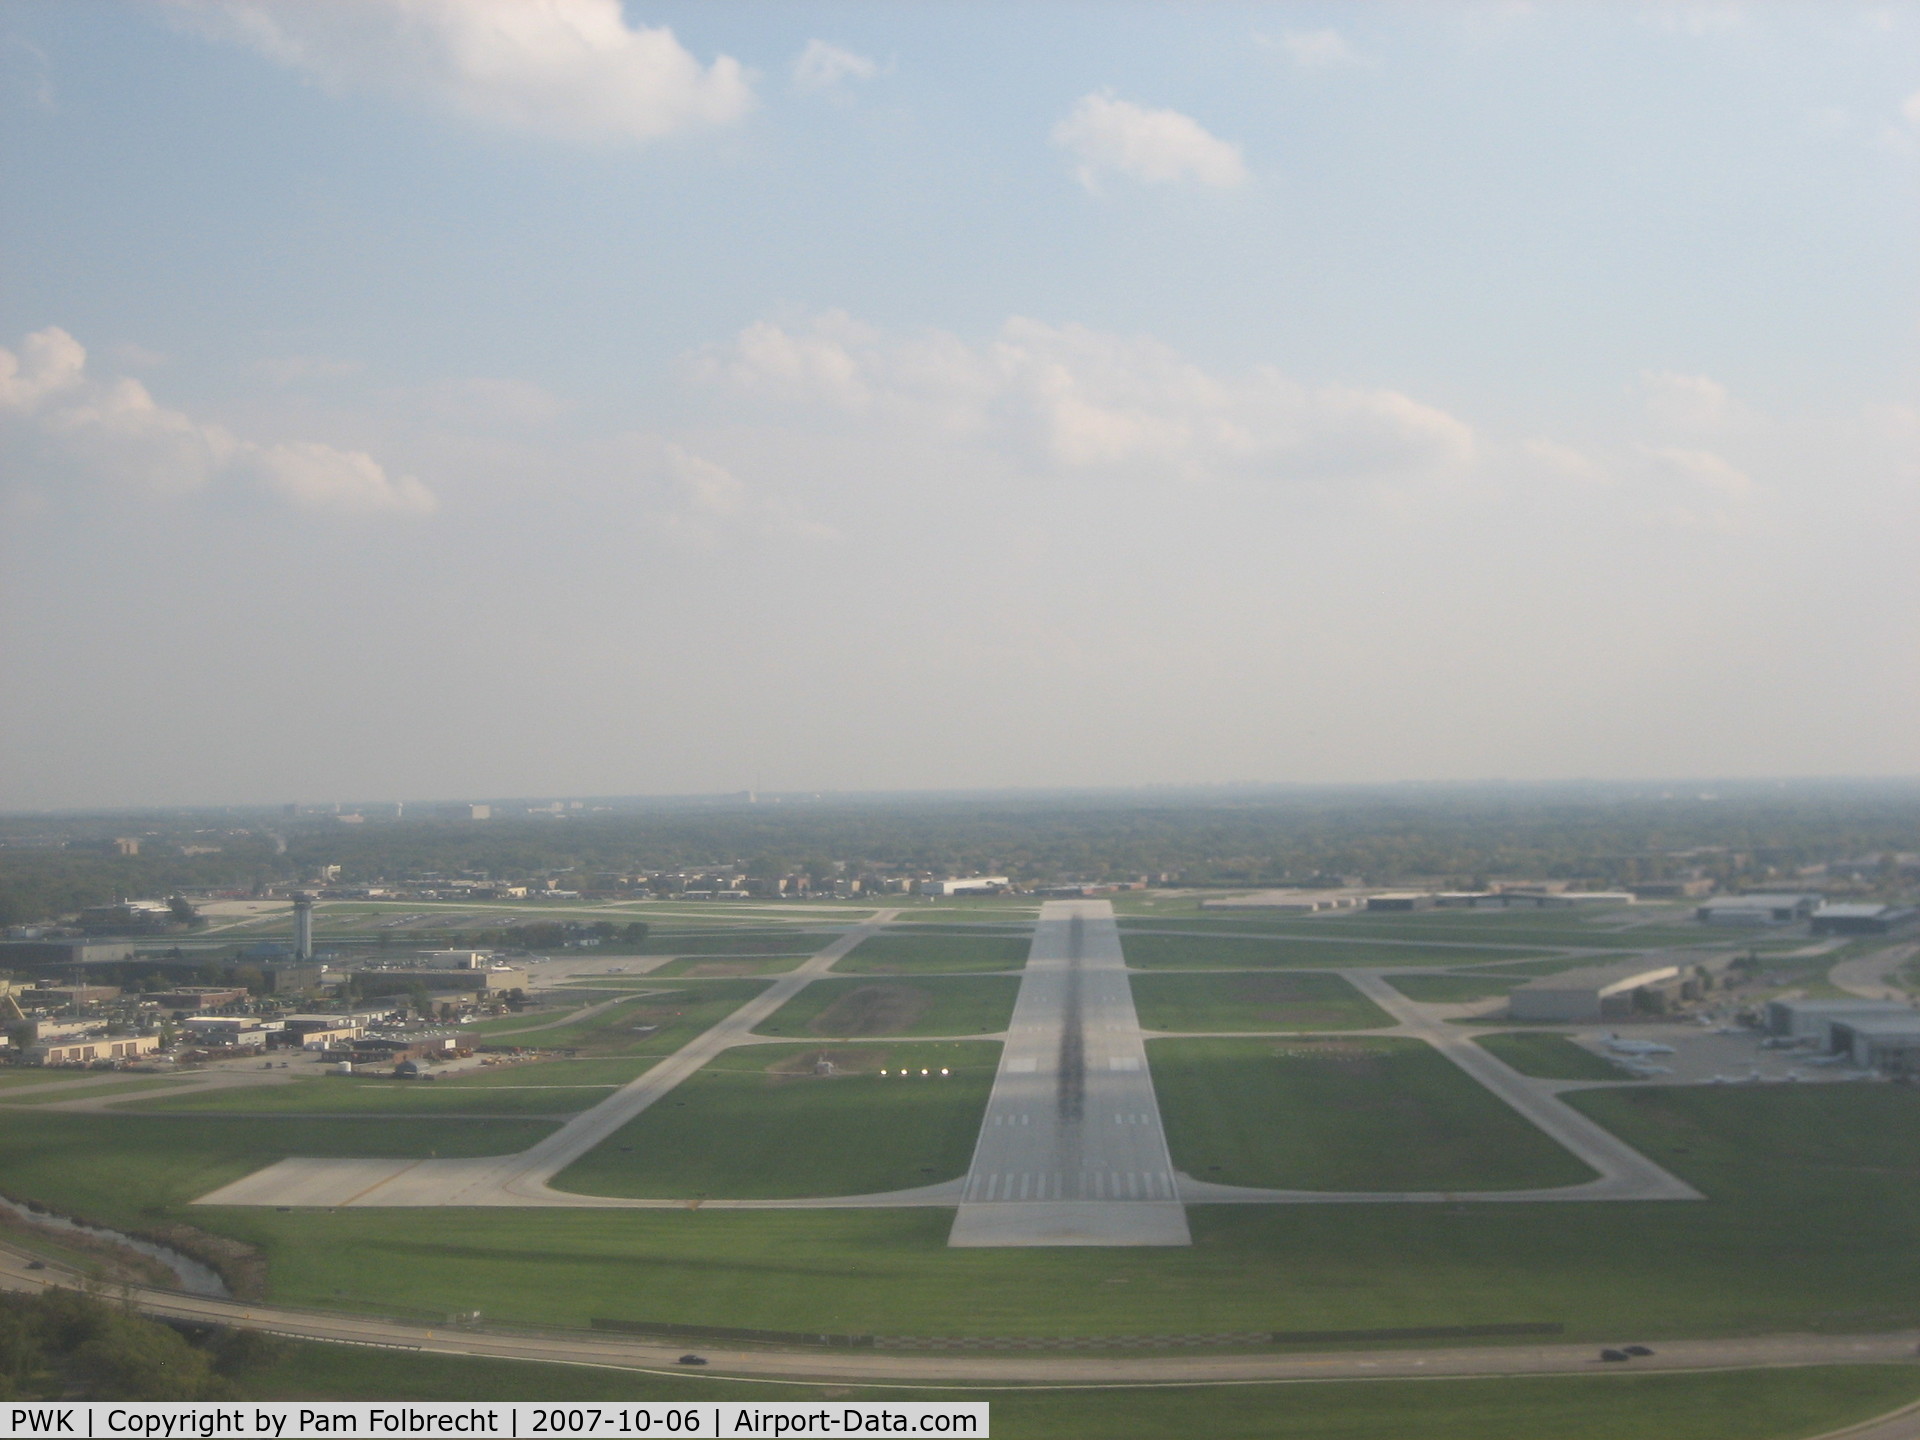 Chicago Executive Airport (PWK) - Short Final to Runway 16